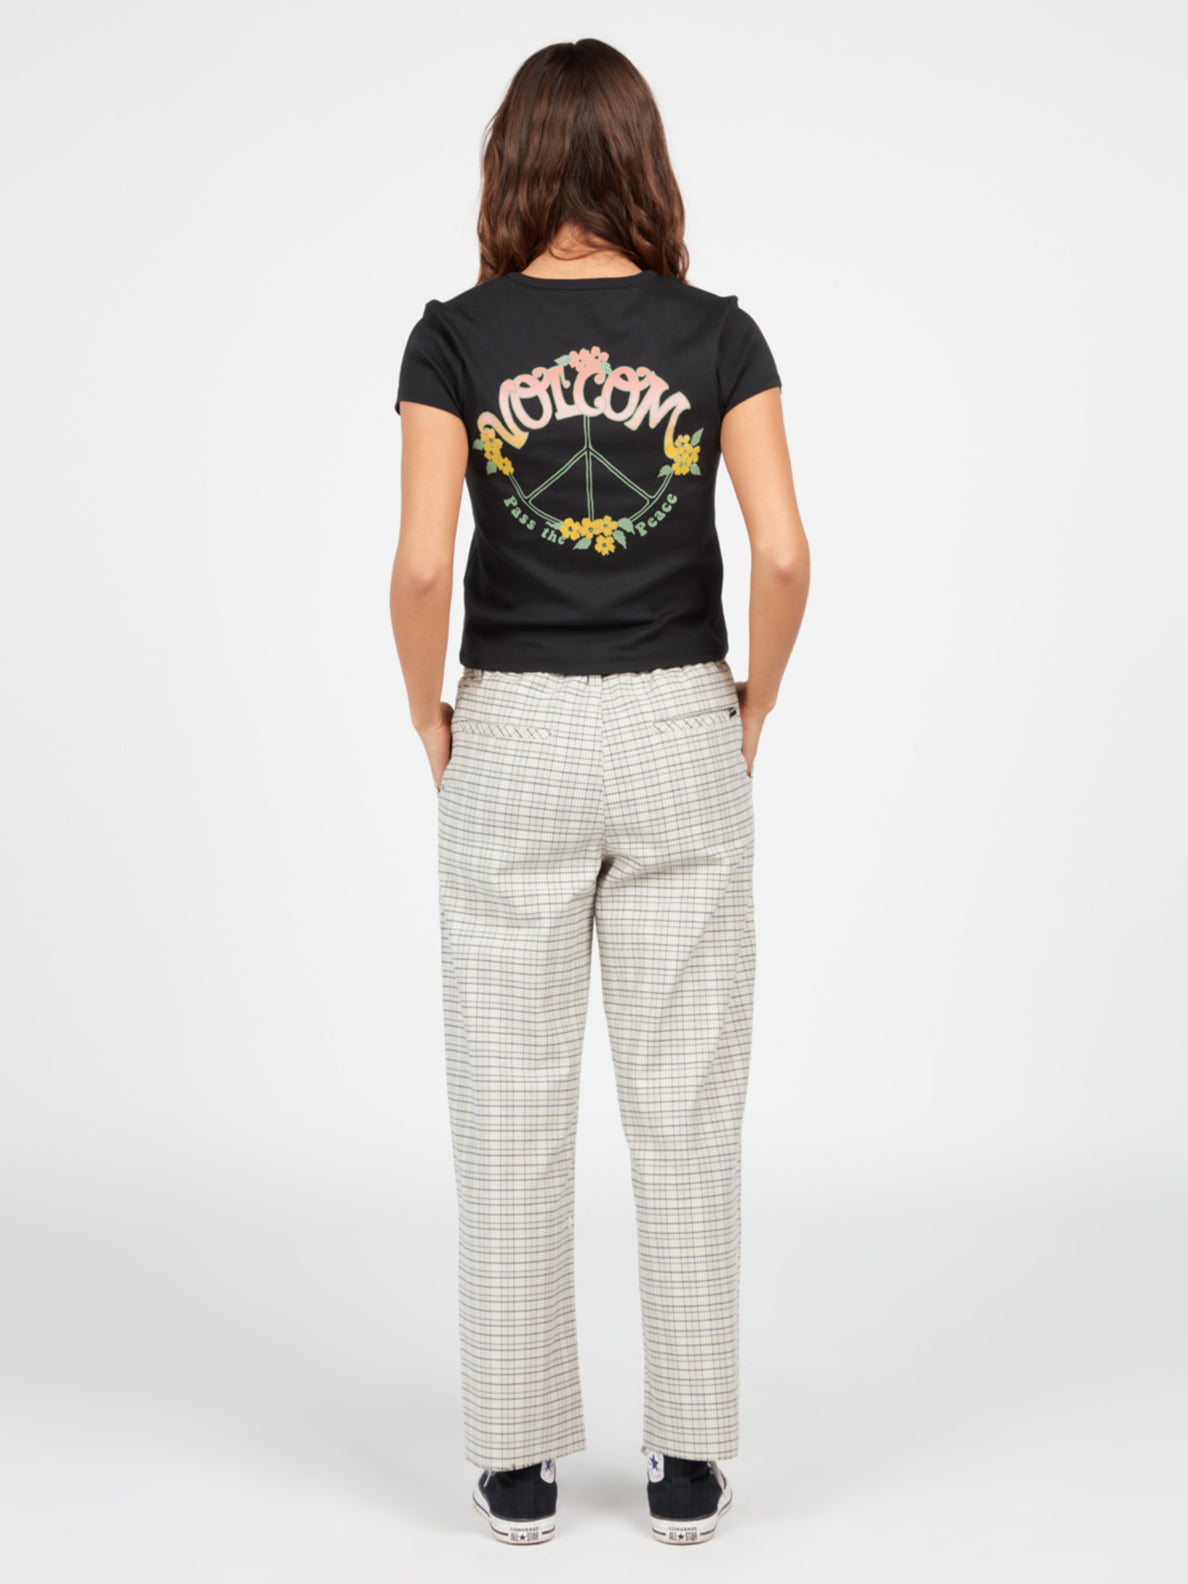 DICKIES Corduroy Womens Carpenter Pants  FOREST  Tillys  Carpenter pants  Dickies Dickies pants